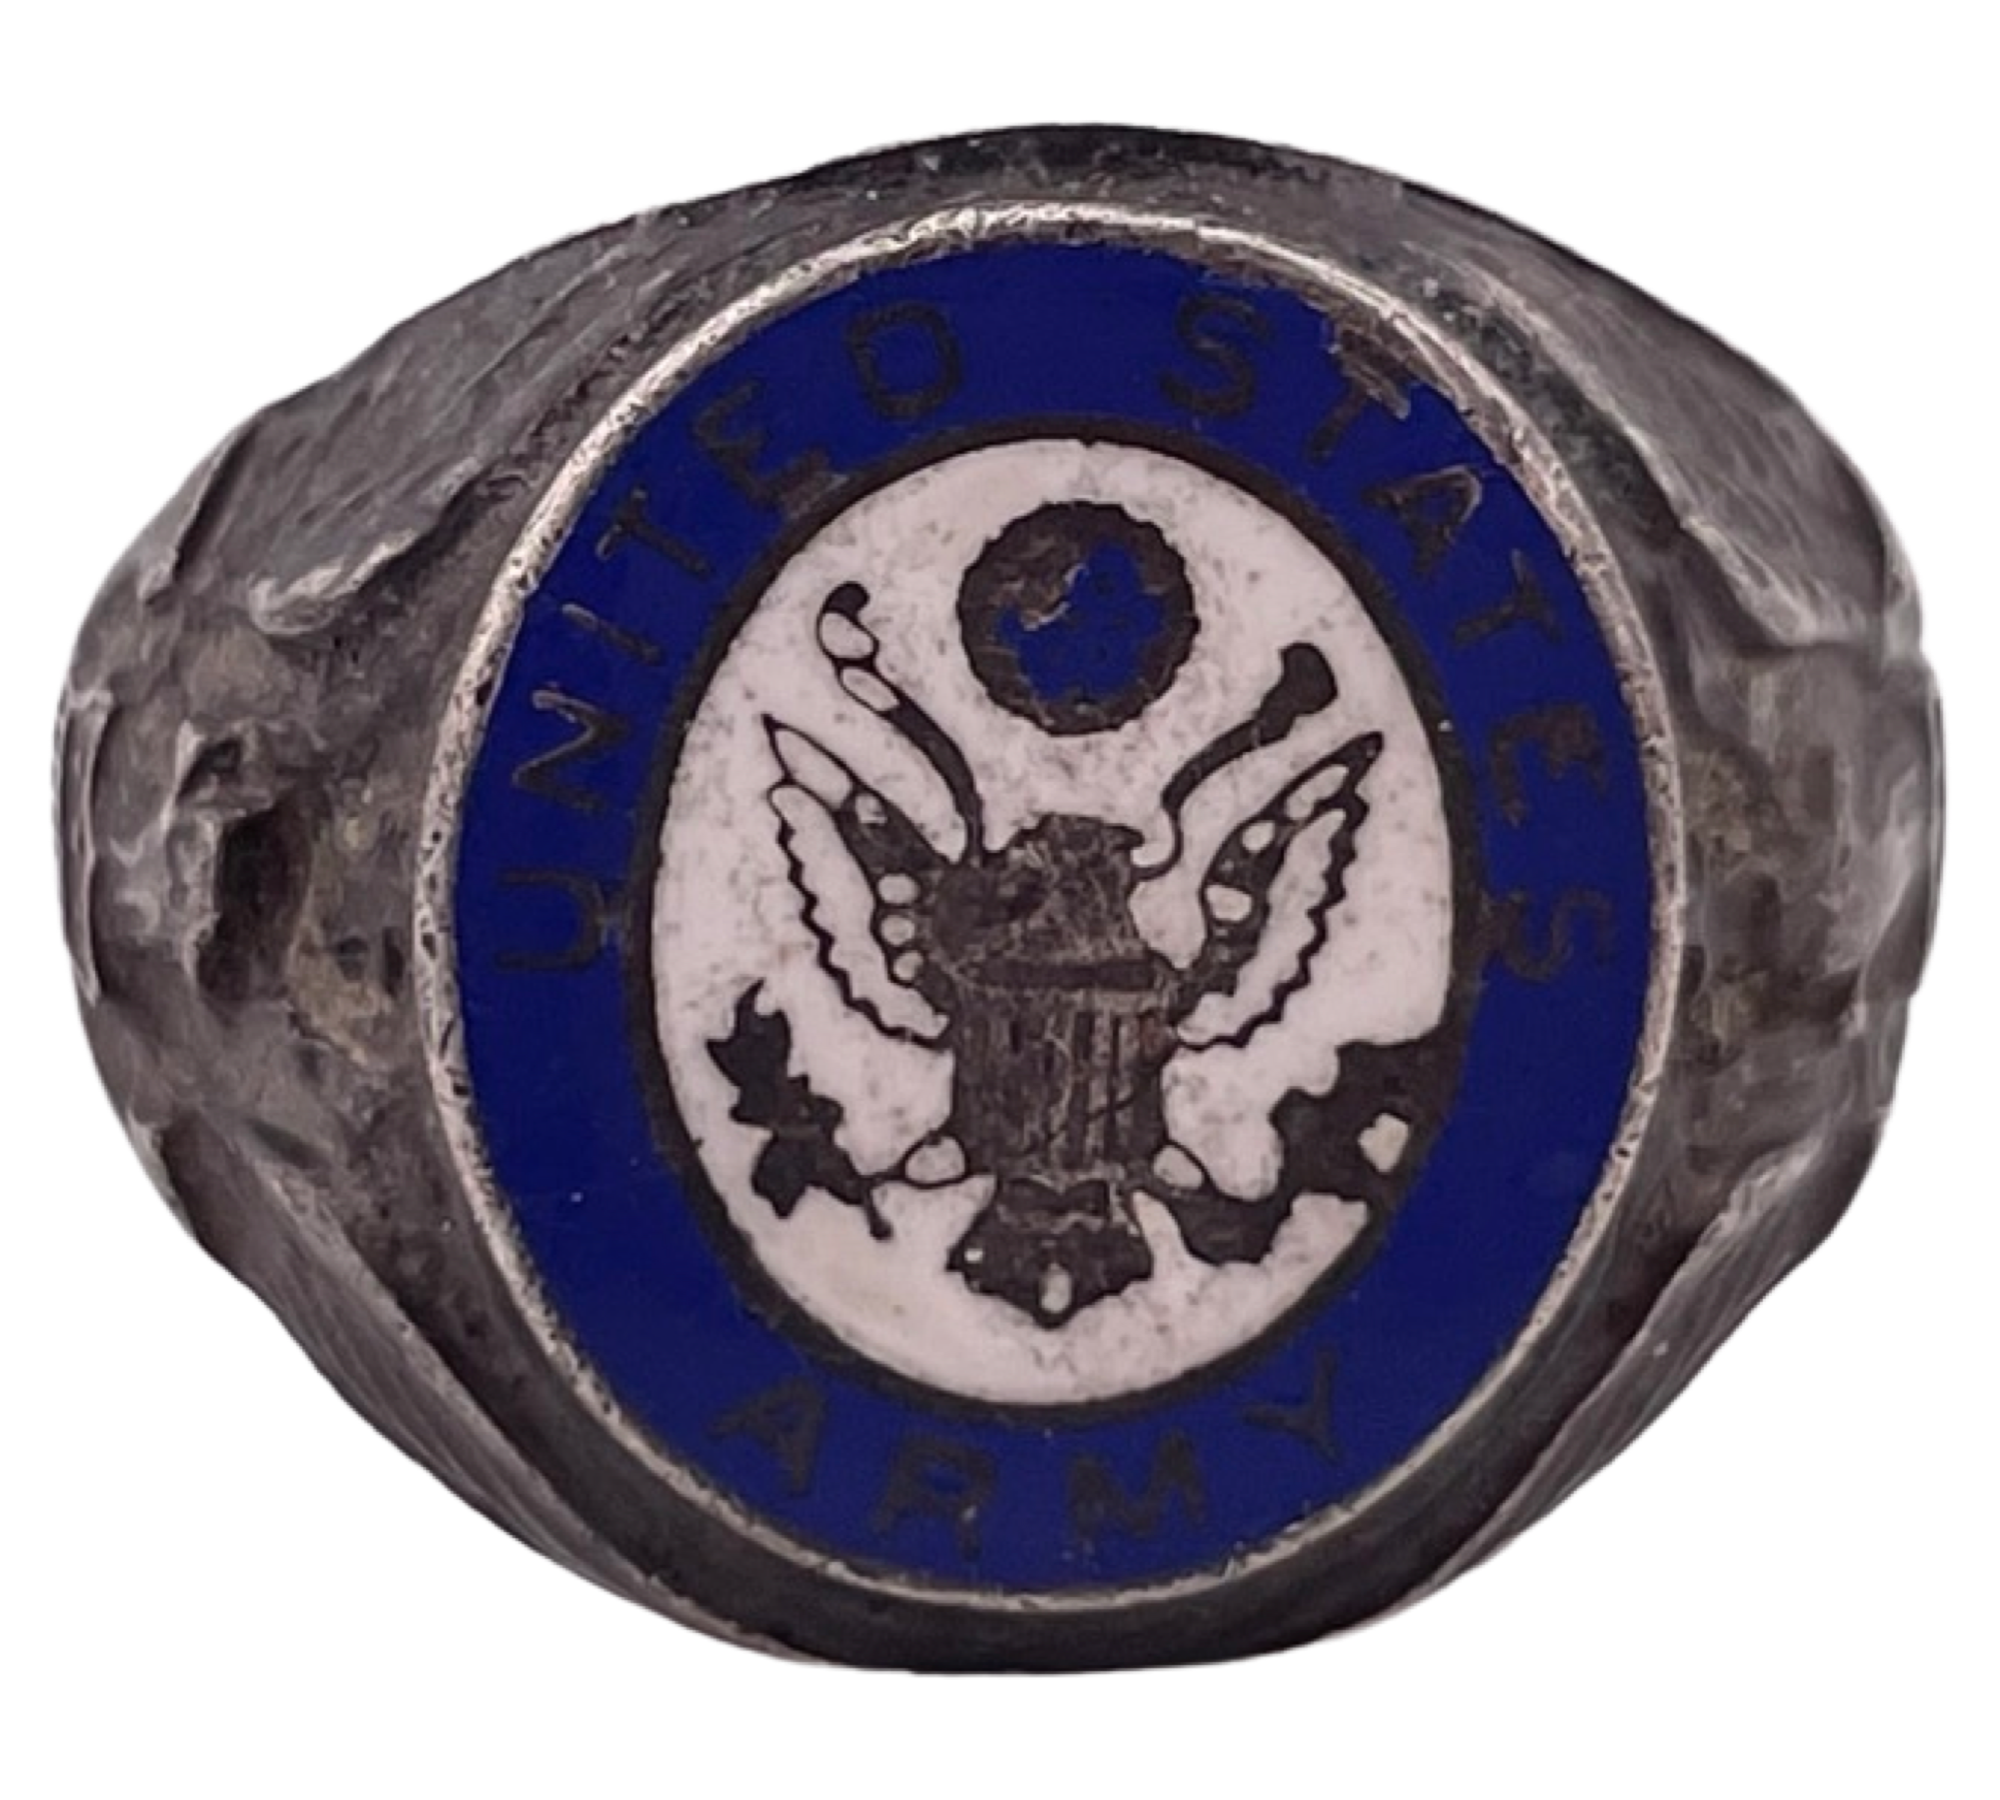 size 8.75 sterling silver enamel United States Army ring